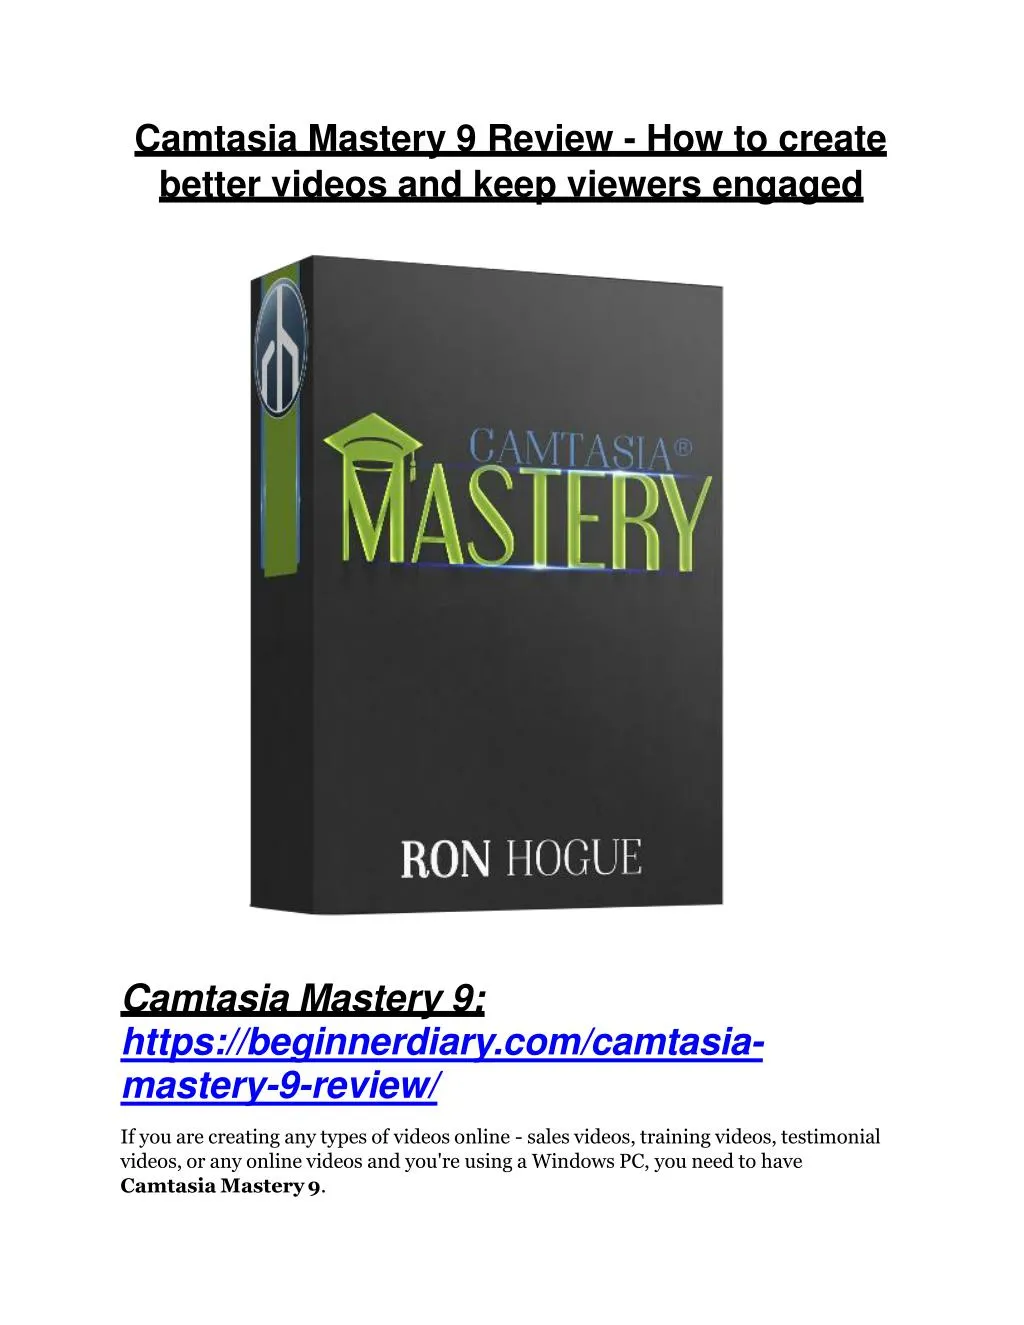 camtasia mastery 9 review how to create better